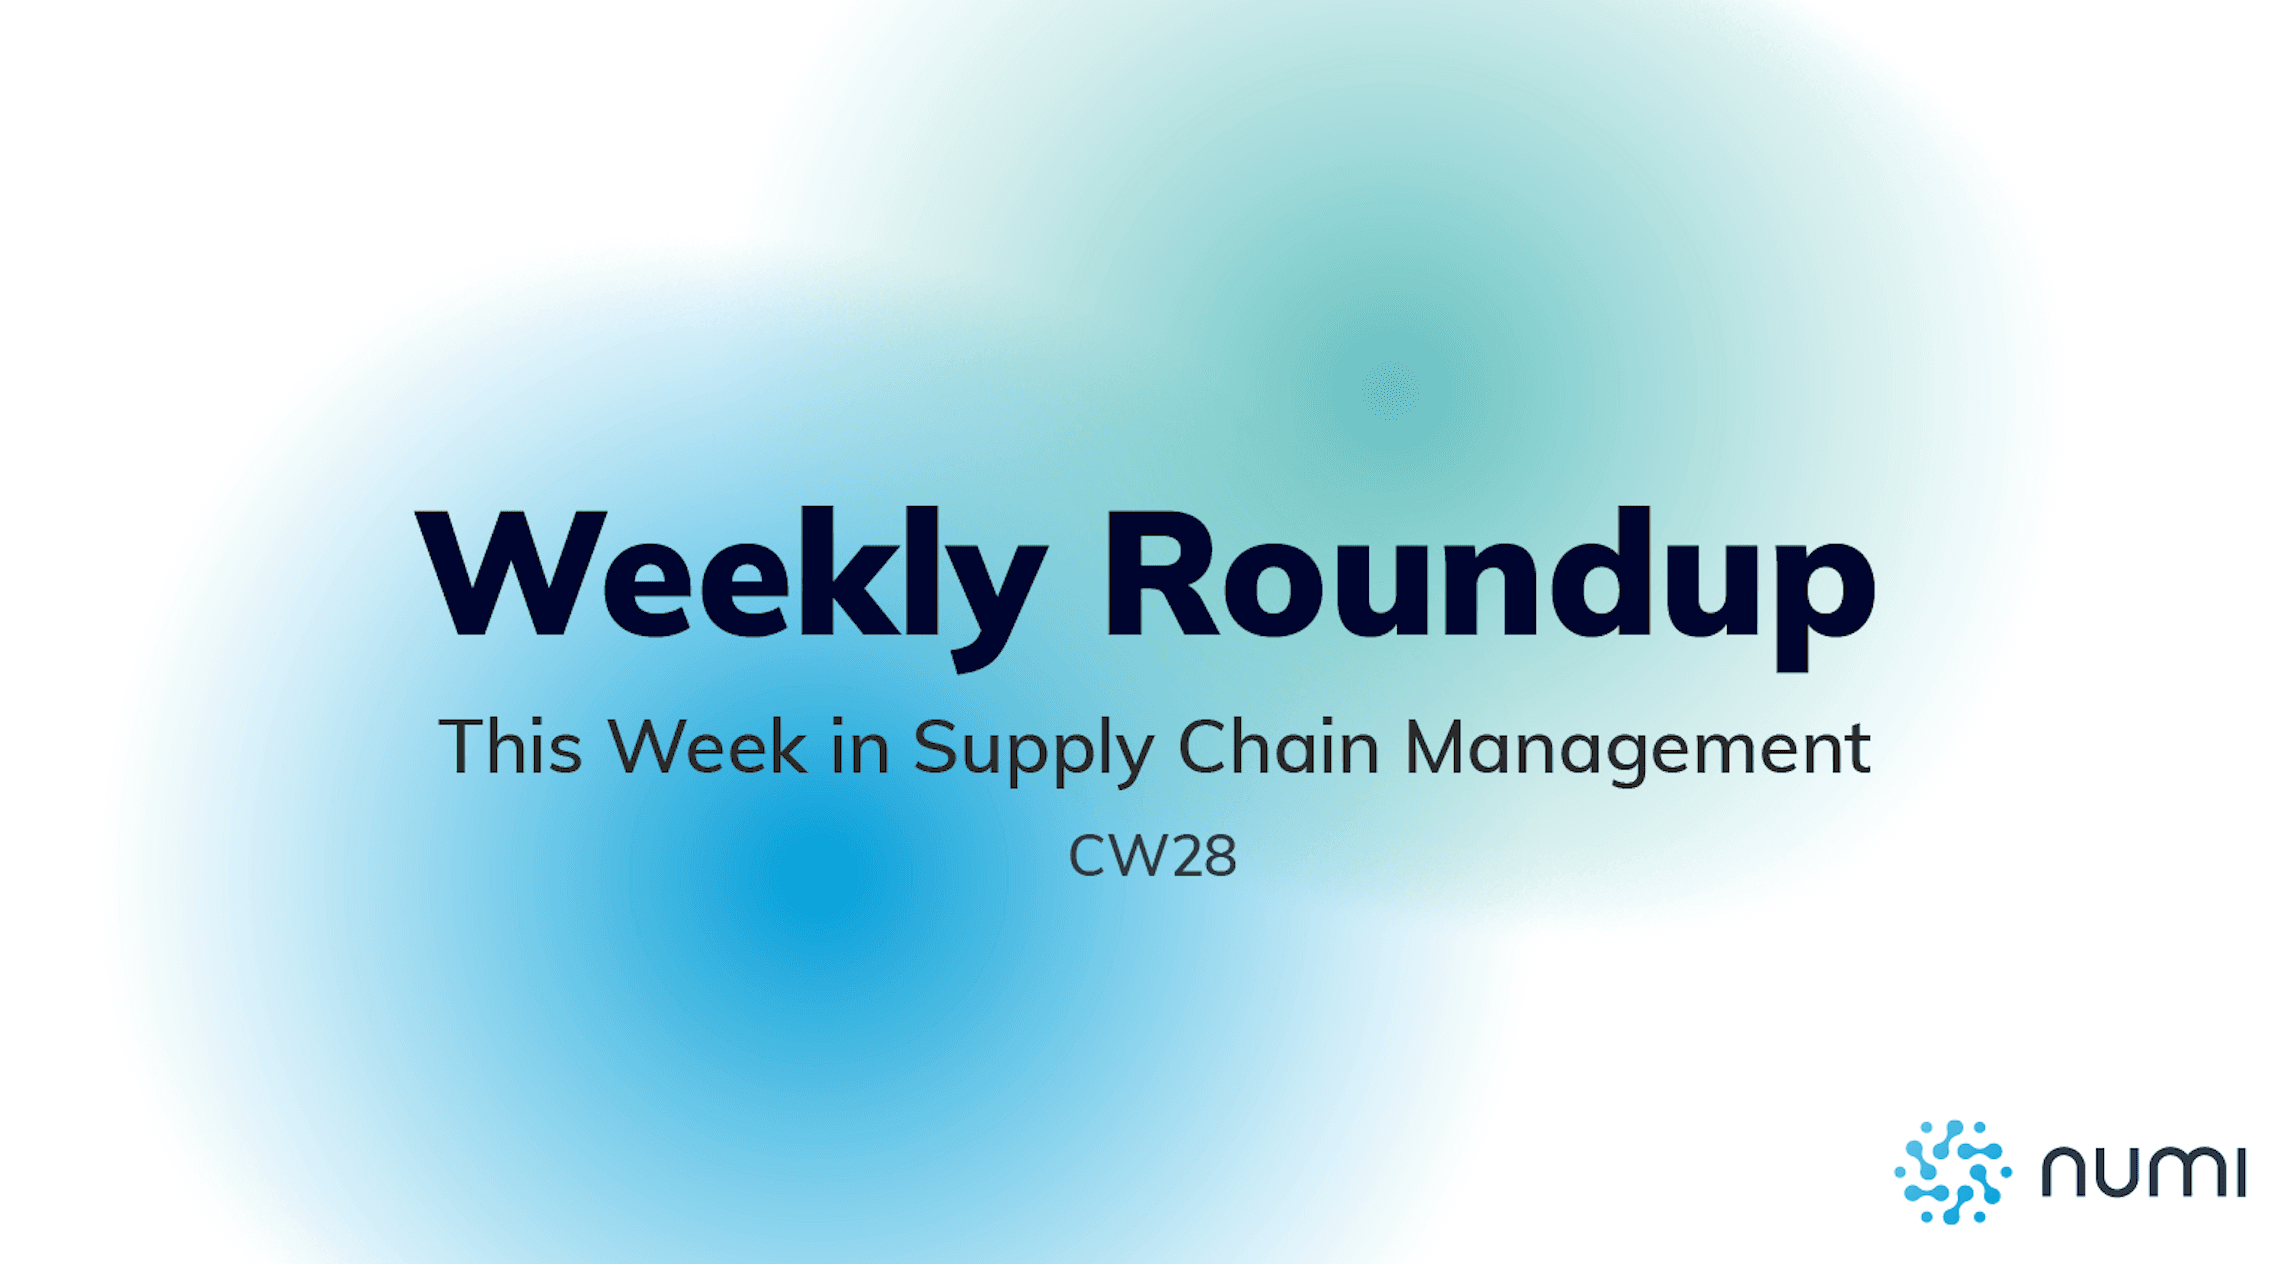 Weekly Roundup - Procurement Benchmarking, Mercedes-Benz’s Improved Picking Performance and Disruptions from Deforestation Regulation